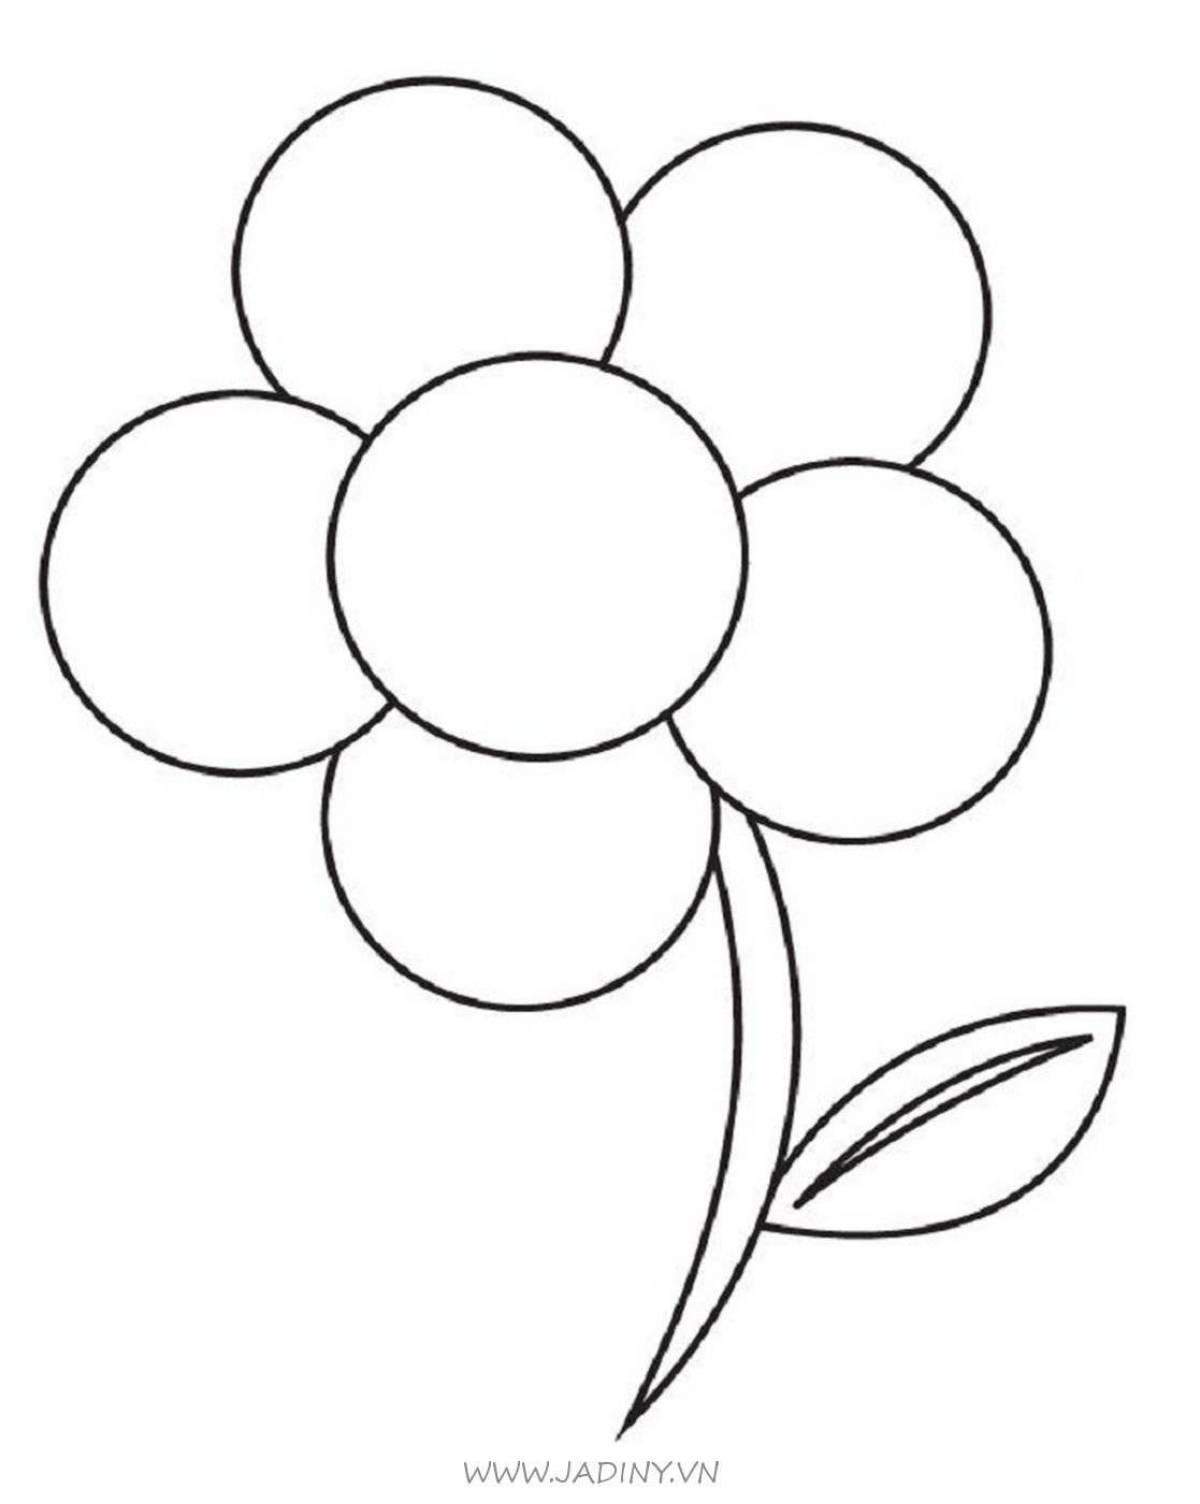 Beautiful flower coloring for children 3-4 years old